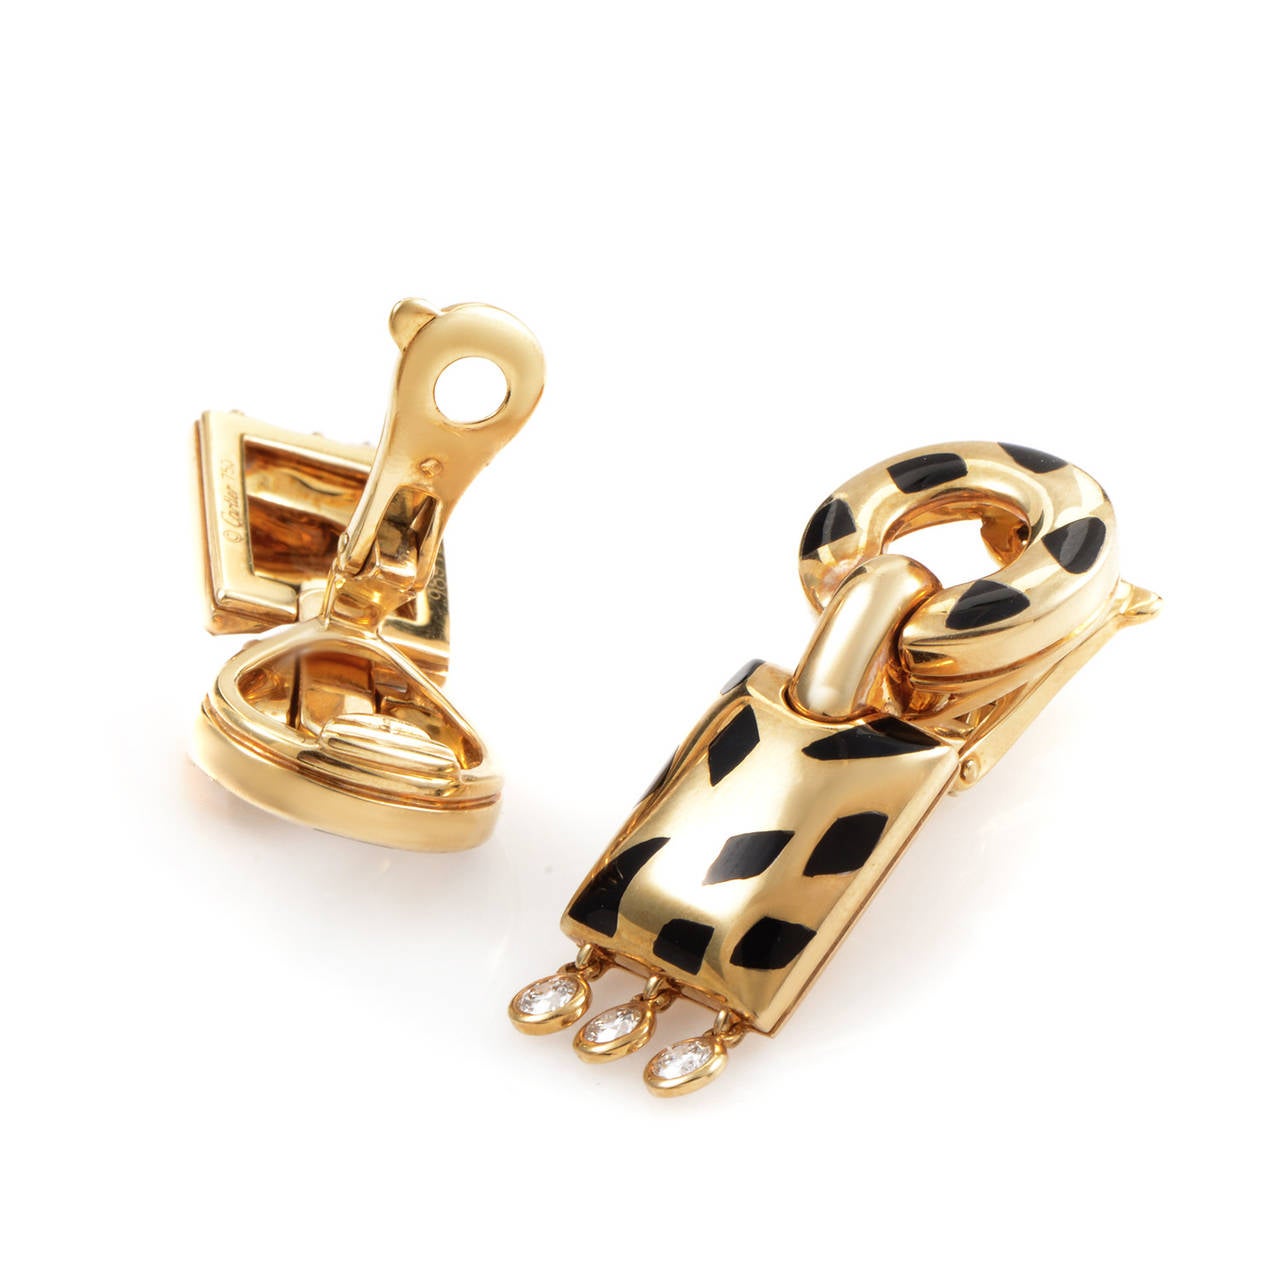 This memorable set of earrings entwines dramatic details and high-quality materials to make a design that could only come from Cartier. The earrings are made of 18K yellow gold and are accented with black enamel 